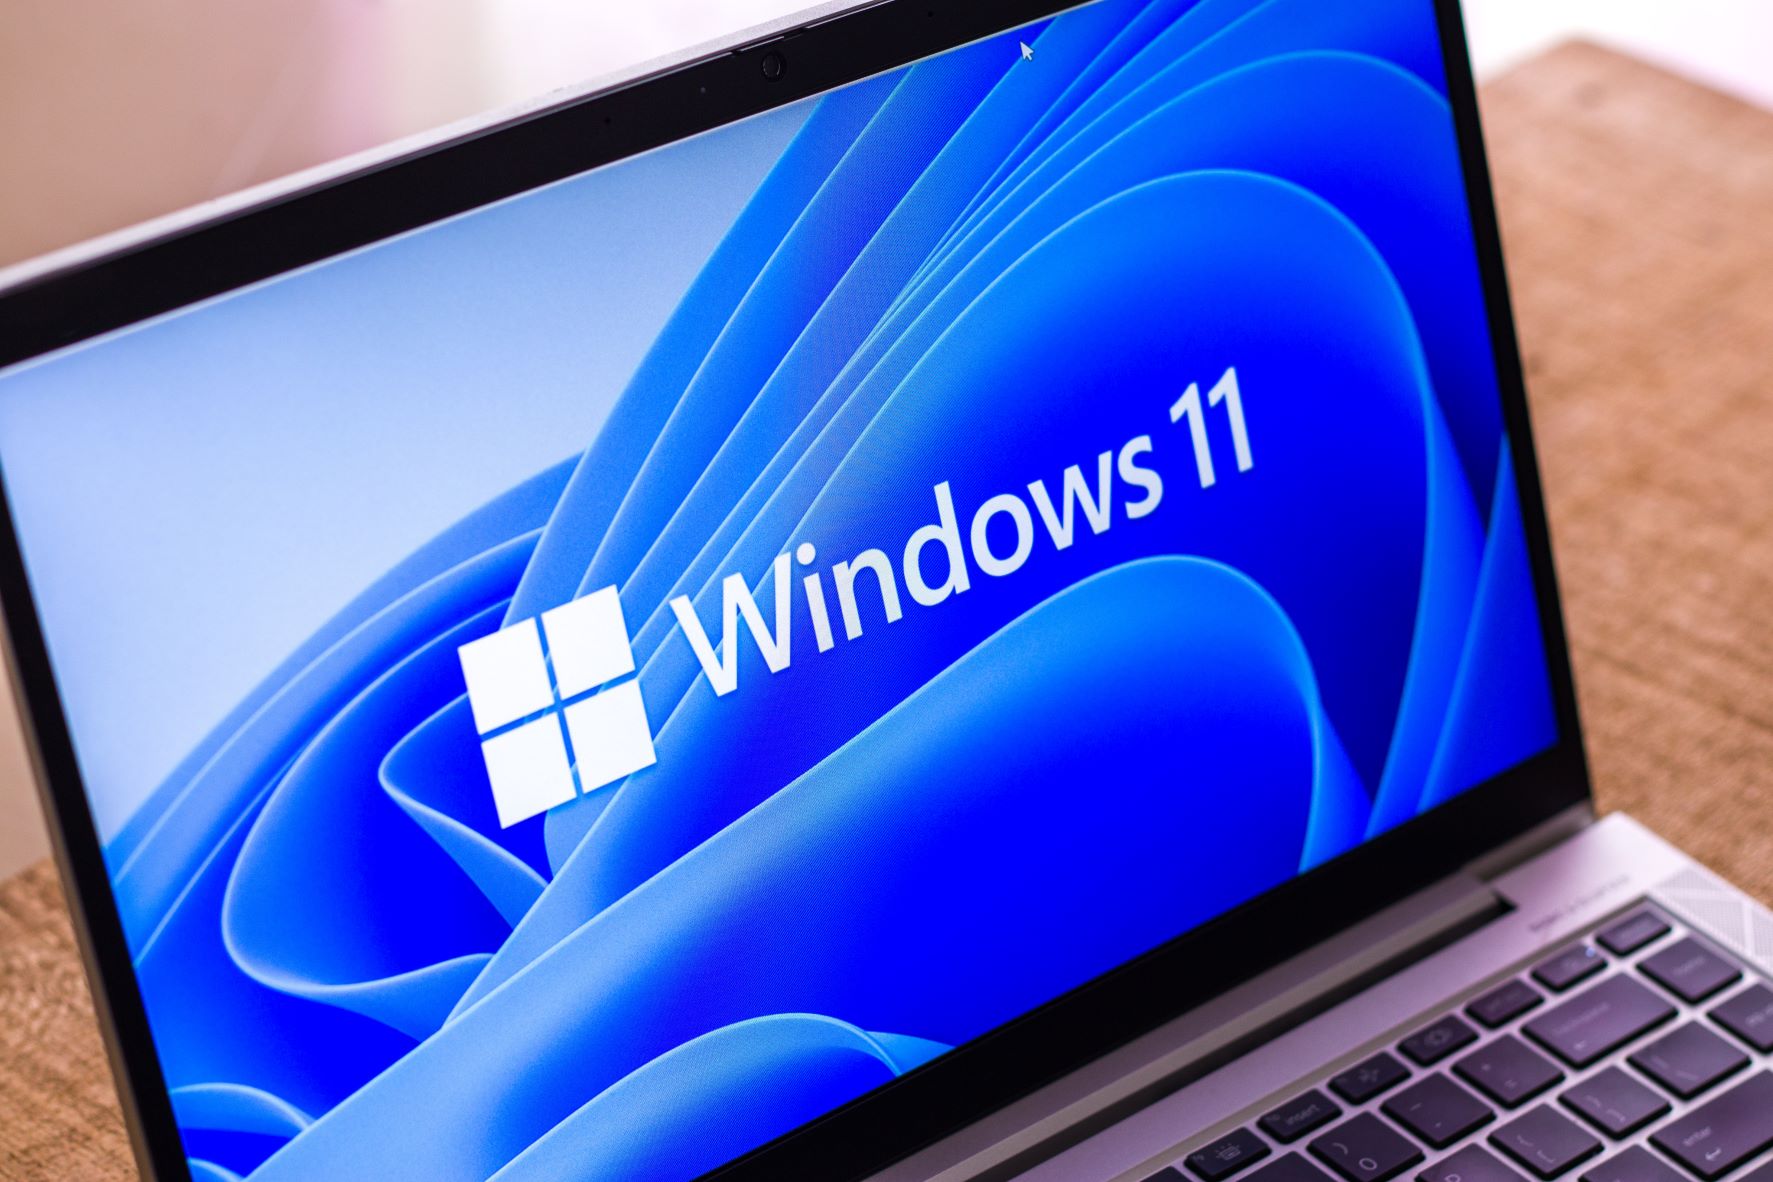 Windows 11 Is Here: When Should I Switch?